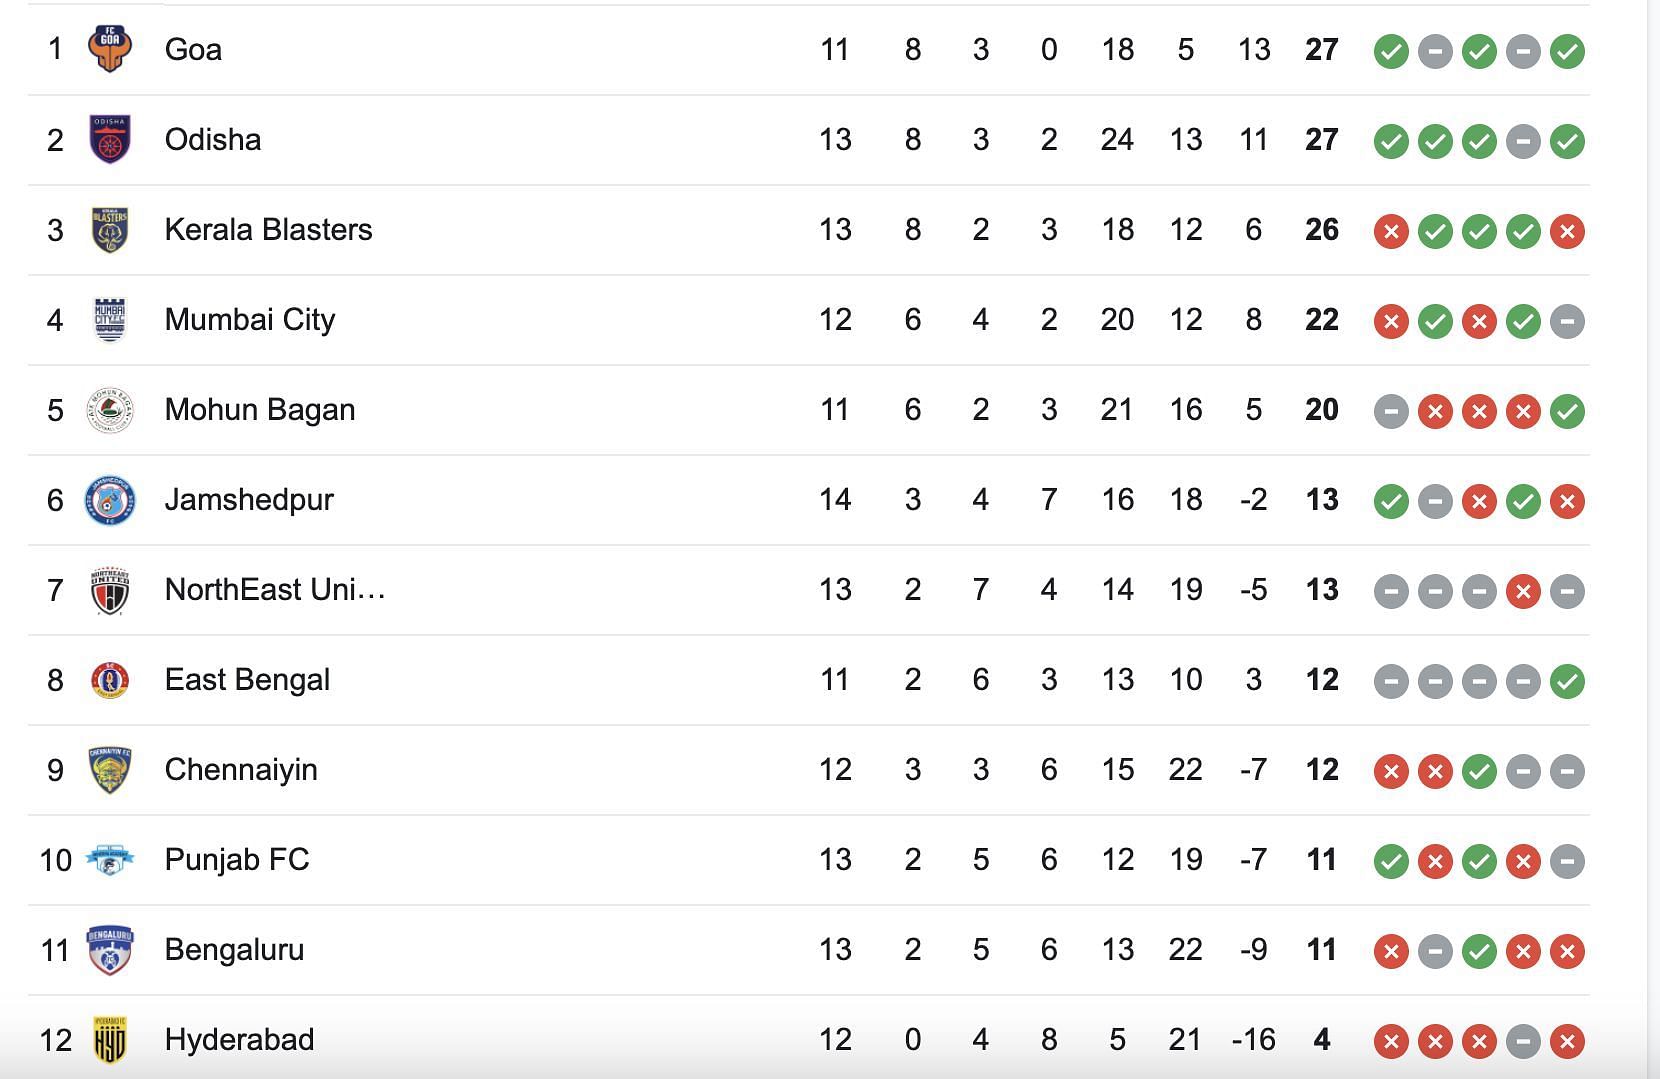 The updated Indian Super League table after Sunday